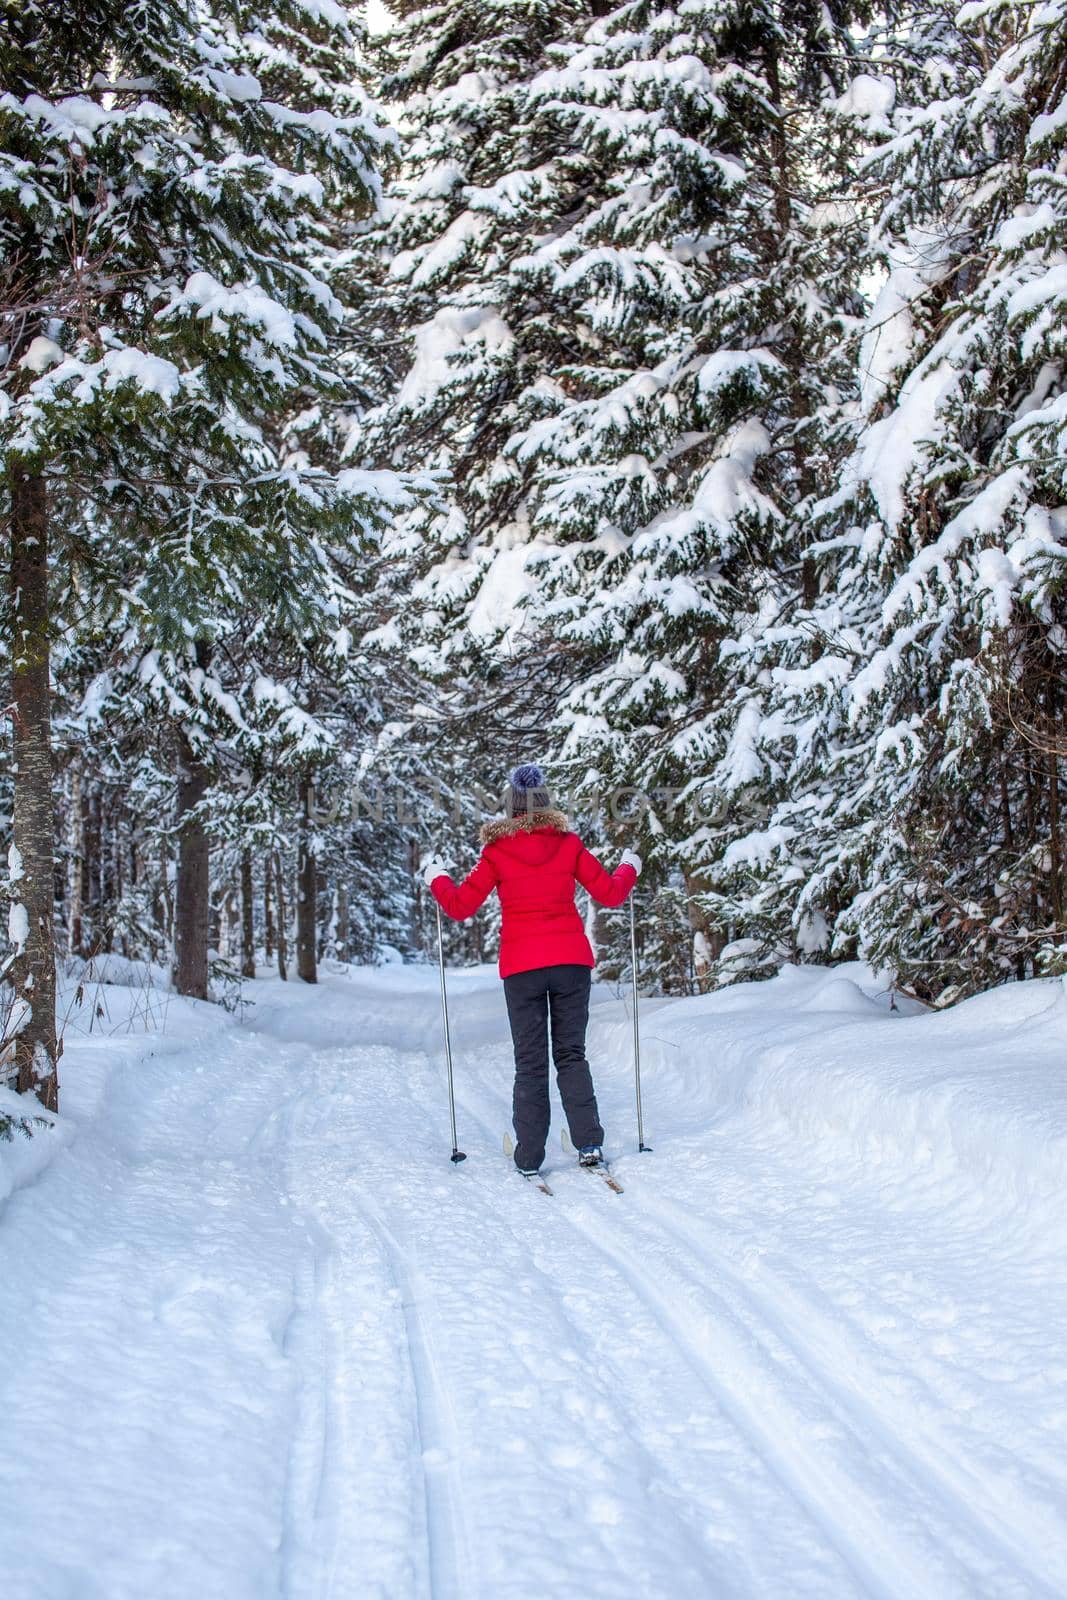 A girl in a red jacket goes skiing in a snowy forest in winter. The view from the back. Snow background with skis between the trees.